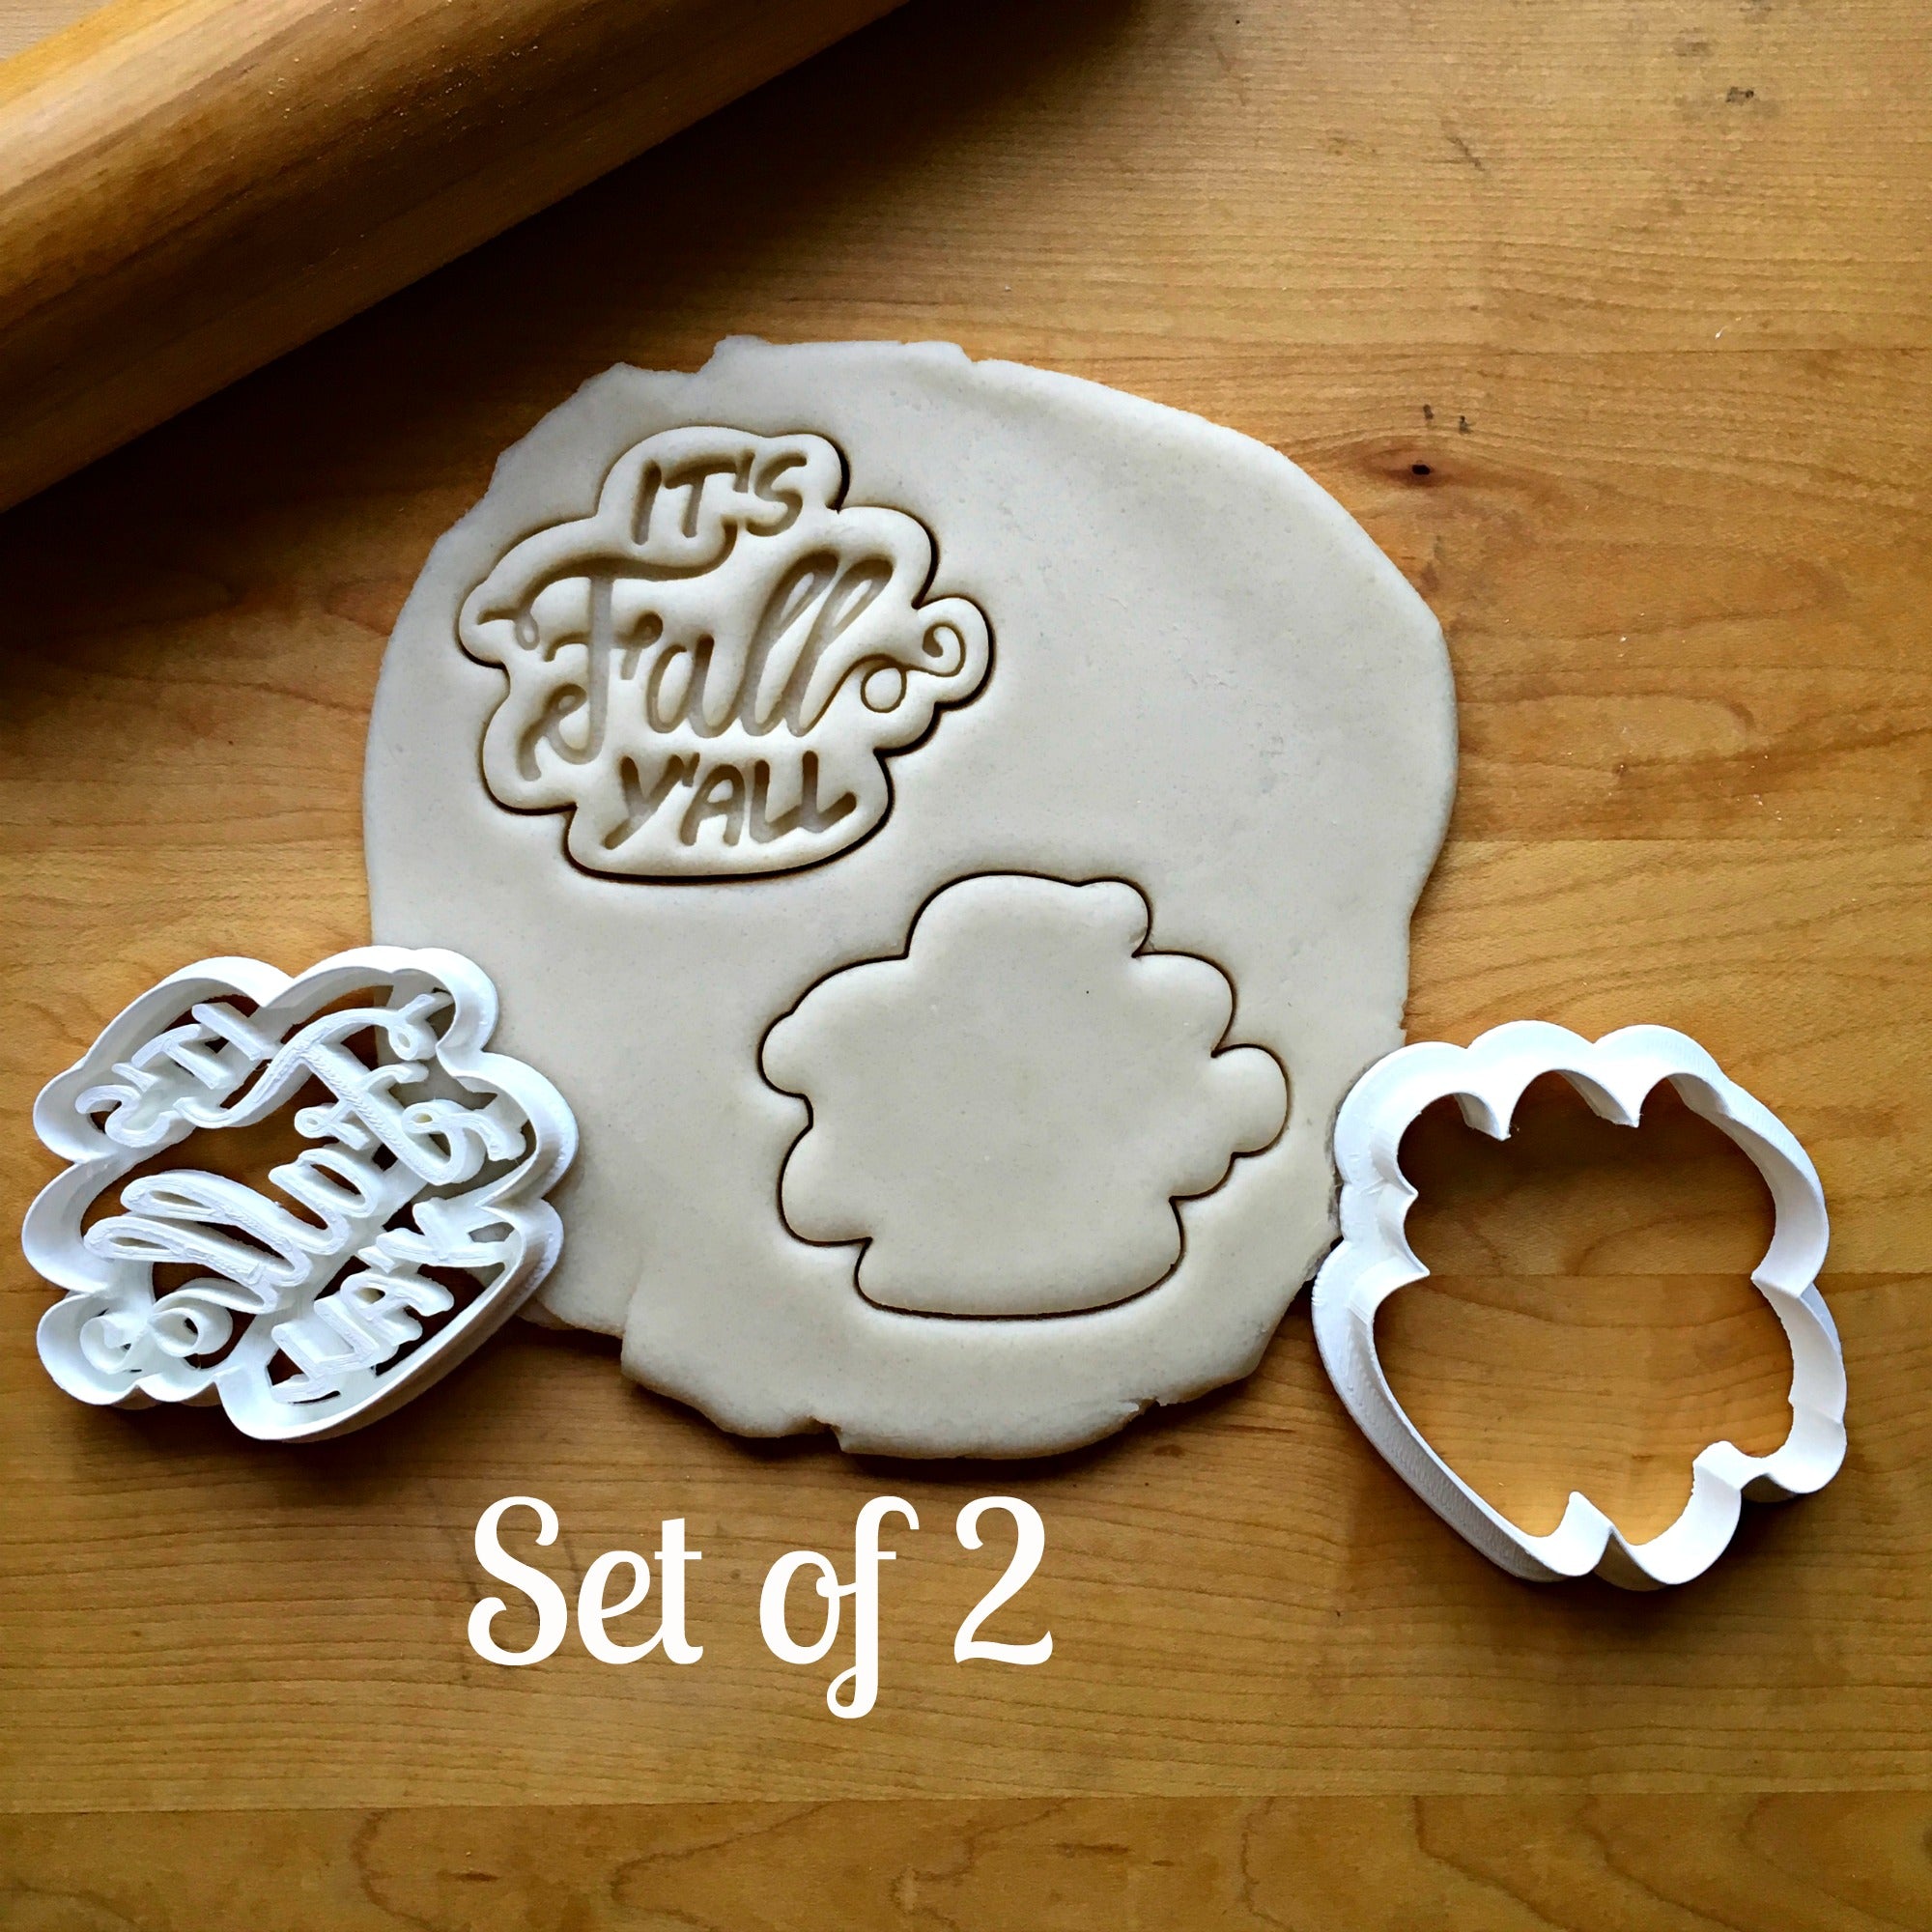 Set of 2 It's Fall Y'all Script Cookie Cutters/Dishwasher Safe